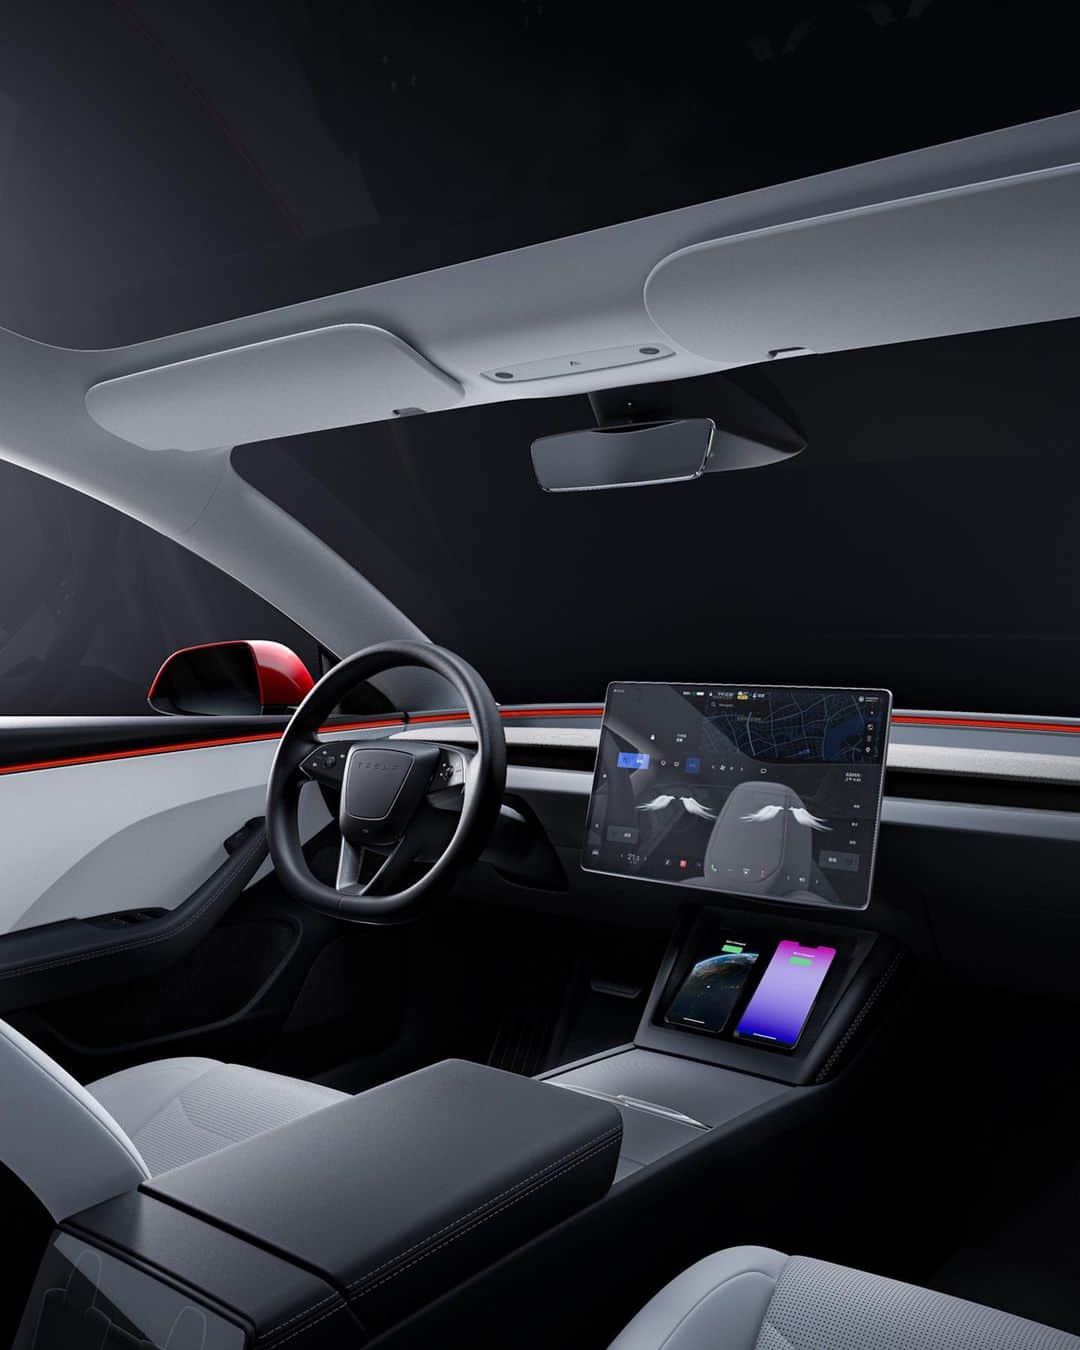 Teslaのインスタグラム：「The latest Model 3 has an all-new interior including:   - Re-designed wrap-around styling - Premium materials & textures - 360° acoustic glass for a quieter cabin - Customizable ambient lighting - Ventilated front seats - New sound system with up to 17 speakers, dual subs and dual amplifiers - Re-designed rear seats for more comfort - Rear screen with entertainment and climate controls  Now available in Europe, Middle East, China & Australia/NZ」